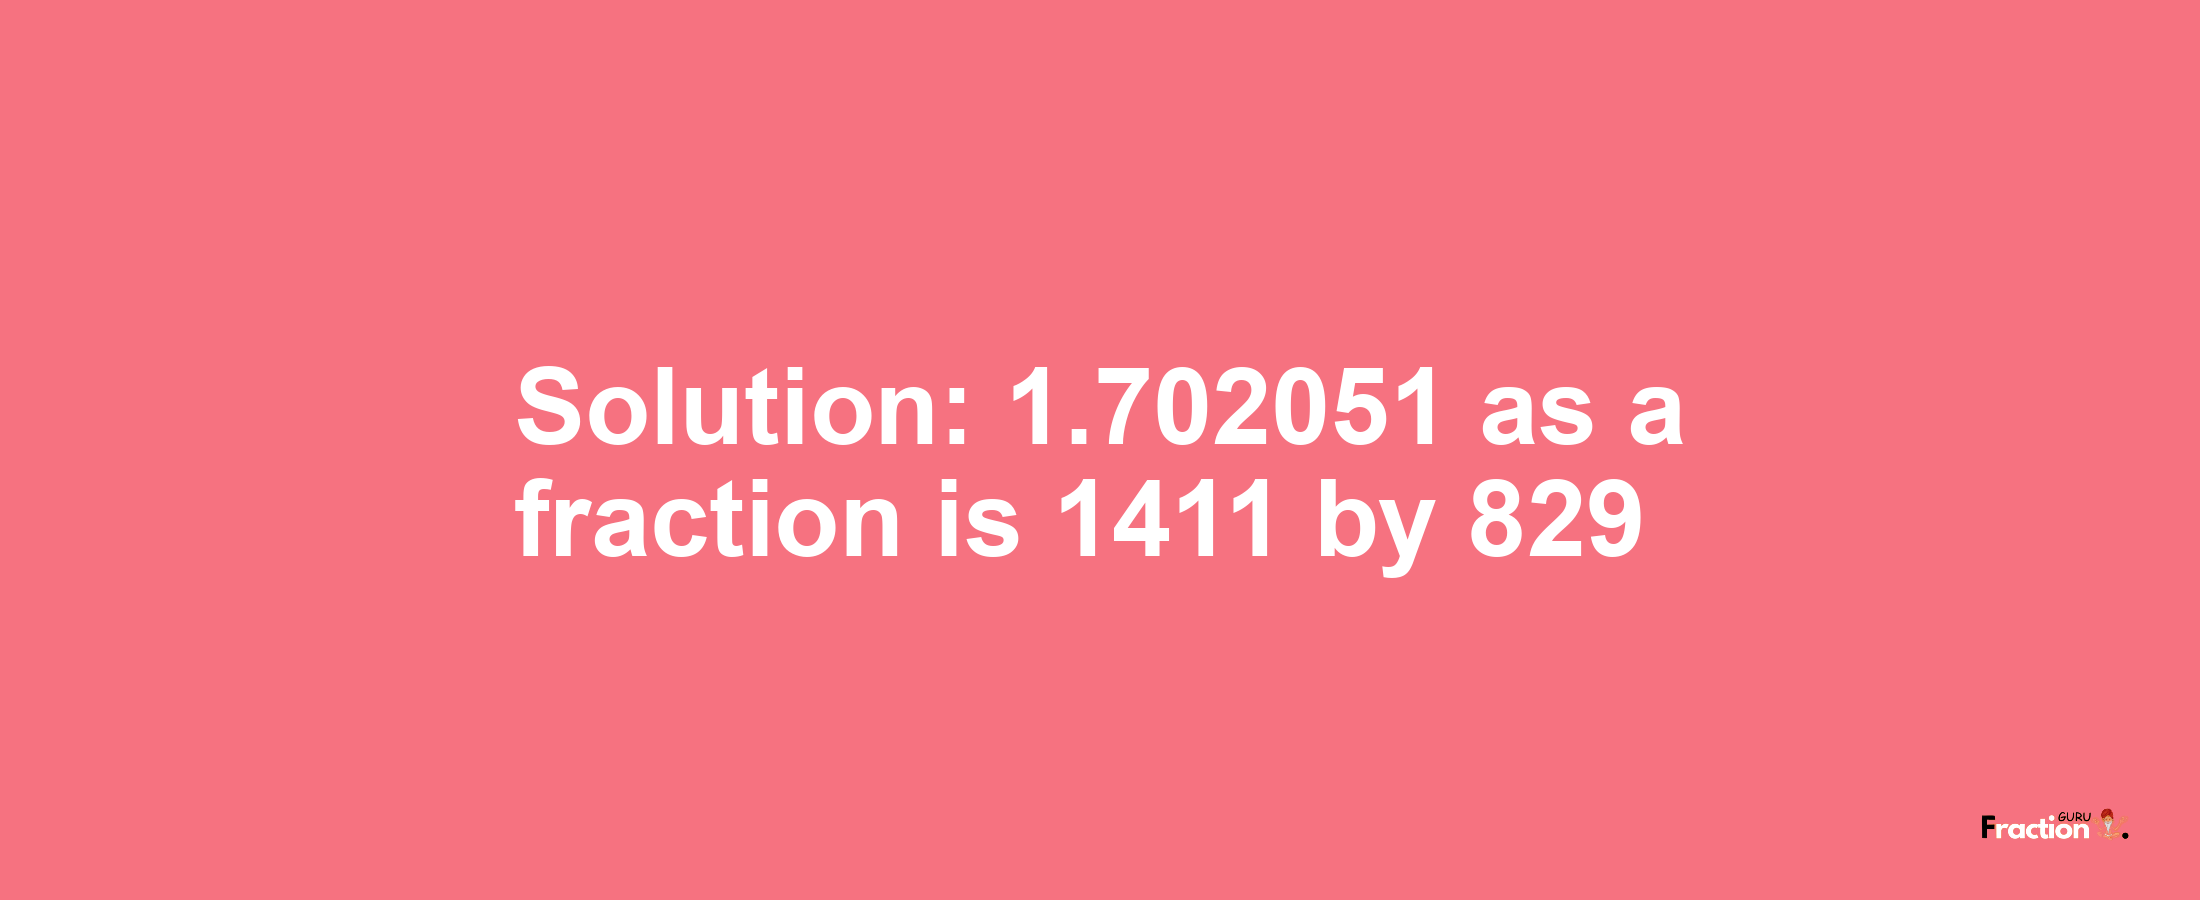 Solution:1.702051 as a fraction is 1411/829